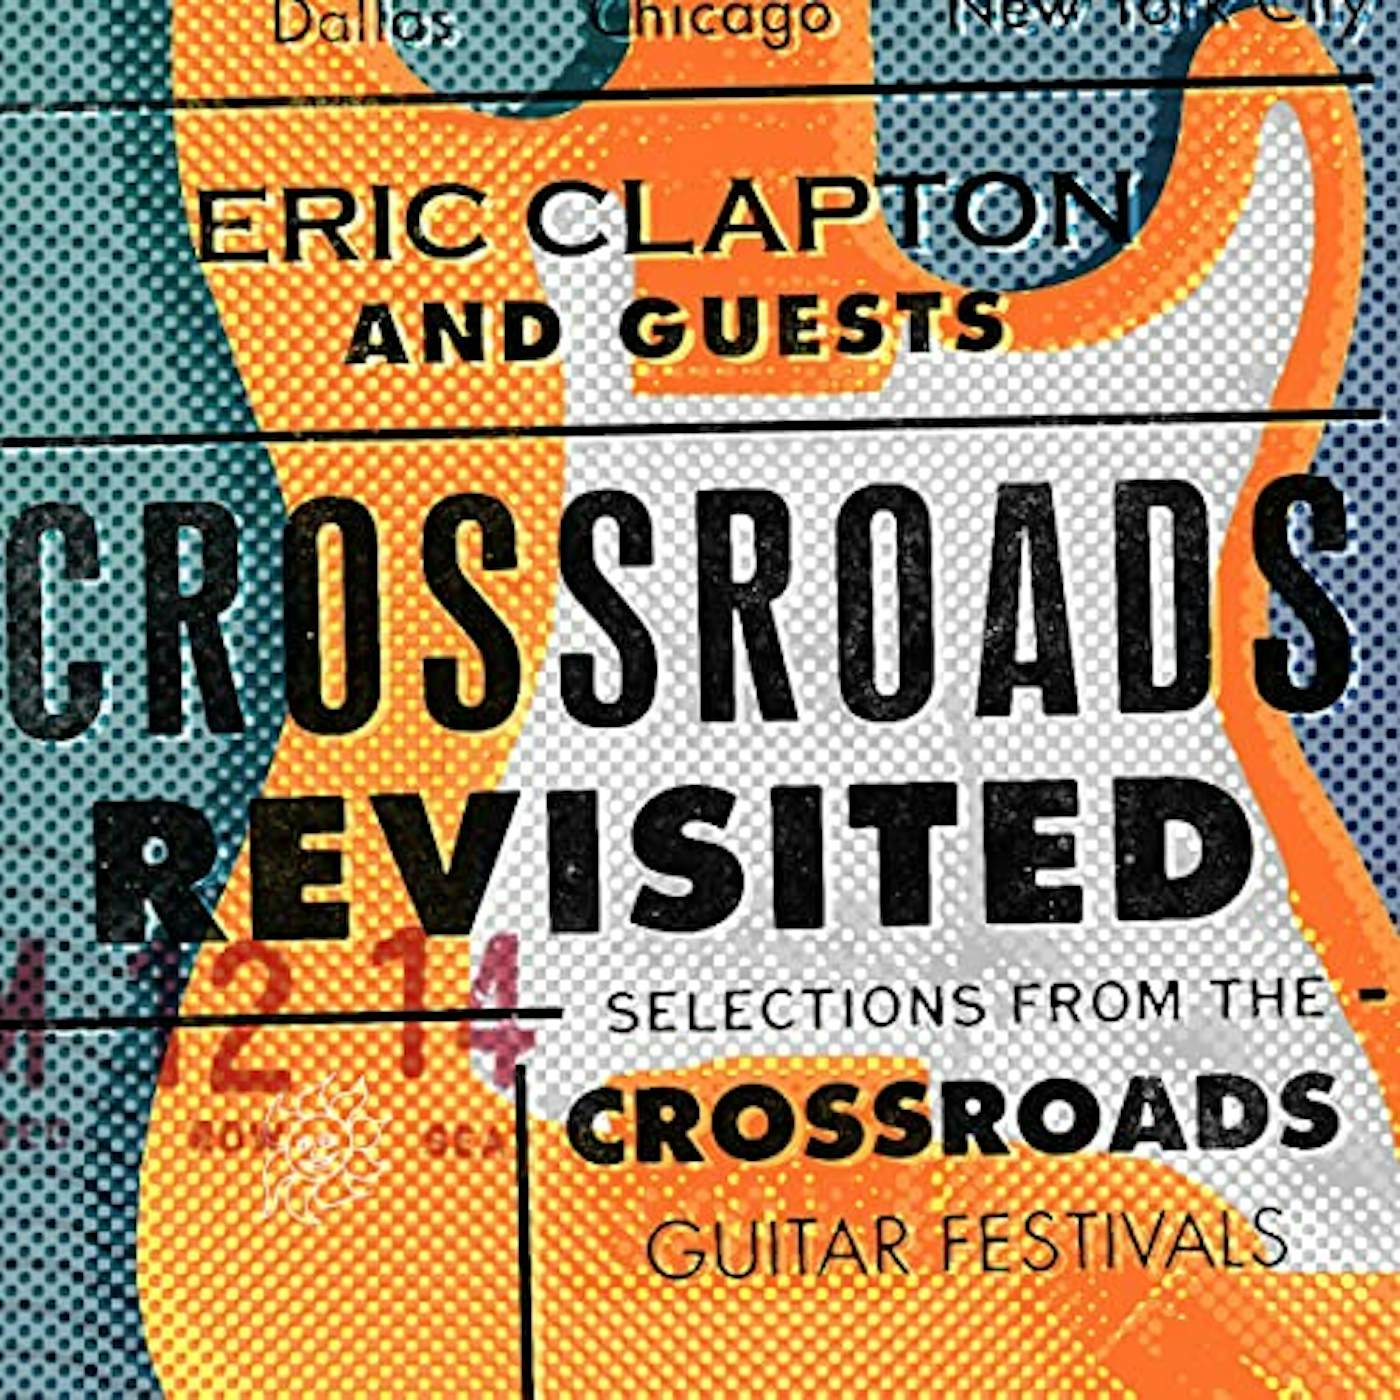 Eric Clapton Crossroads Revisited: Selections From The Guitar (6LP/Box Set) Vinyl Record